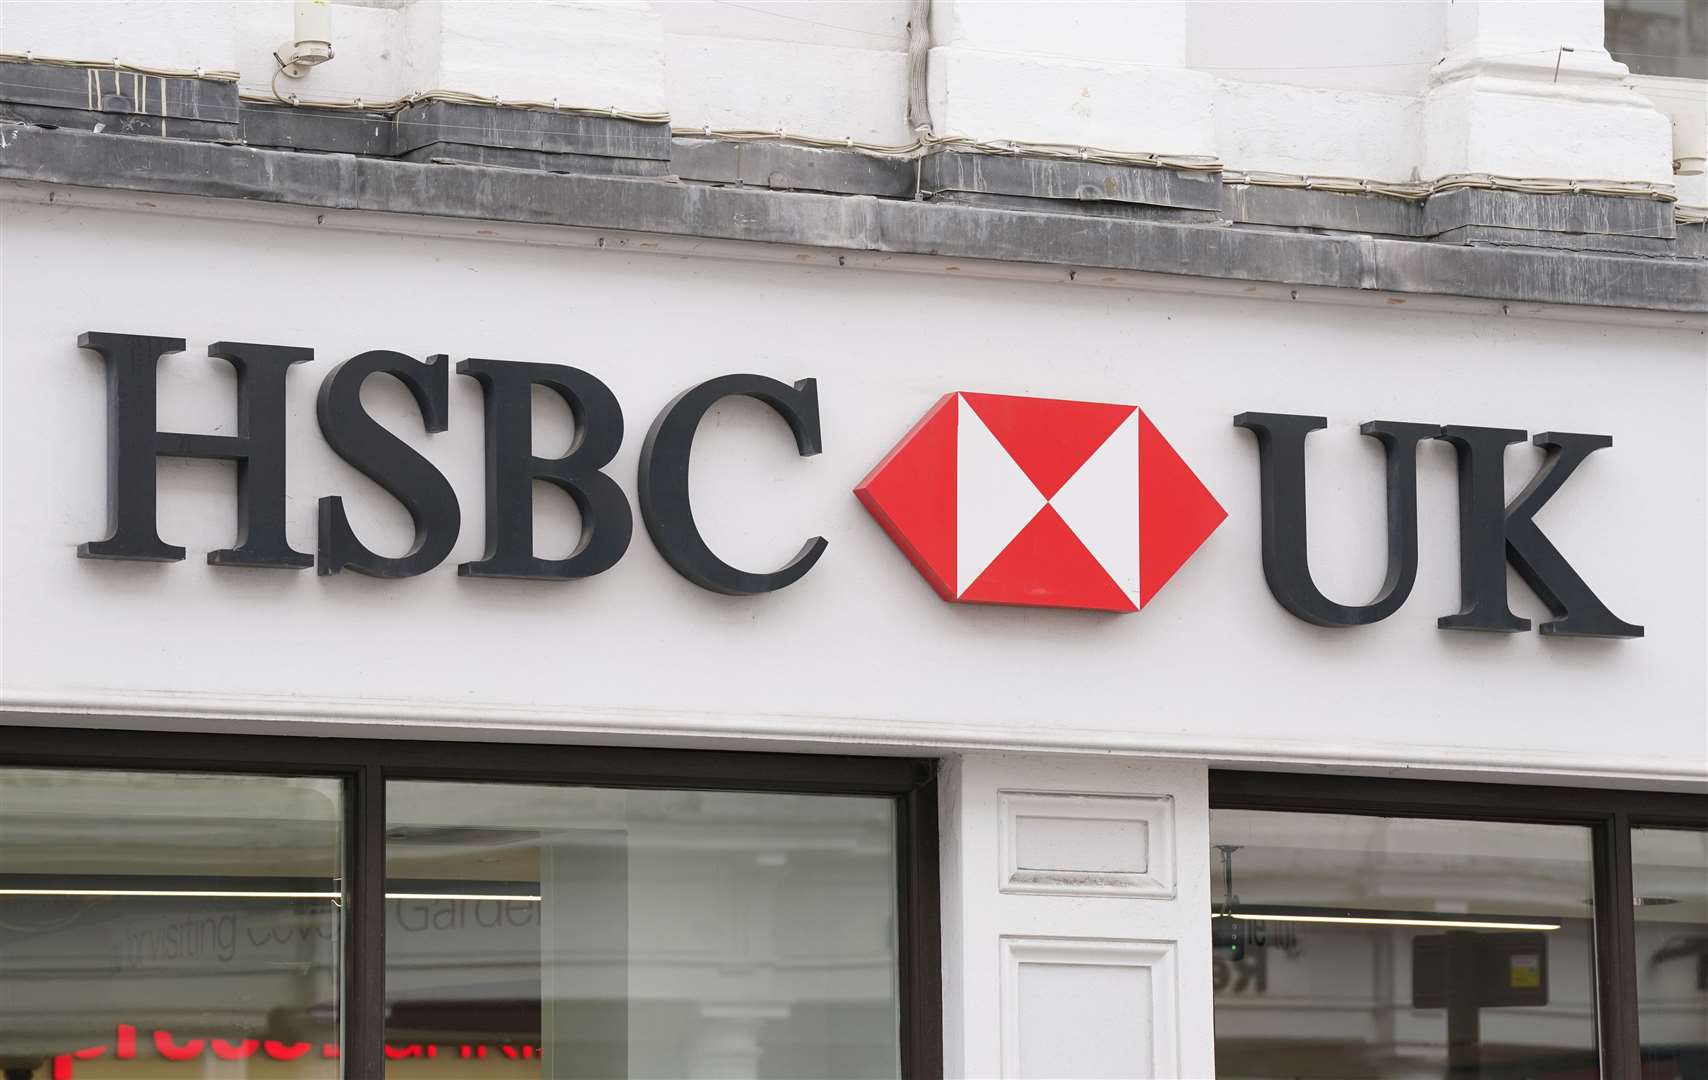 HSBC urged businesses to look closely at contact details in emails (Lucy North/PA)